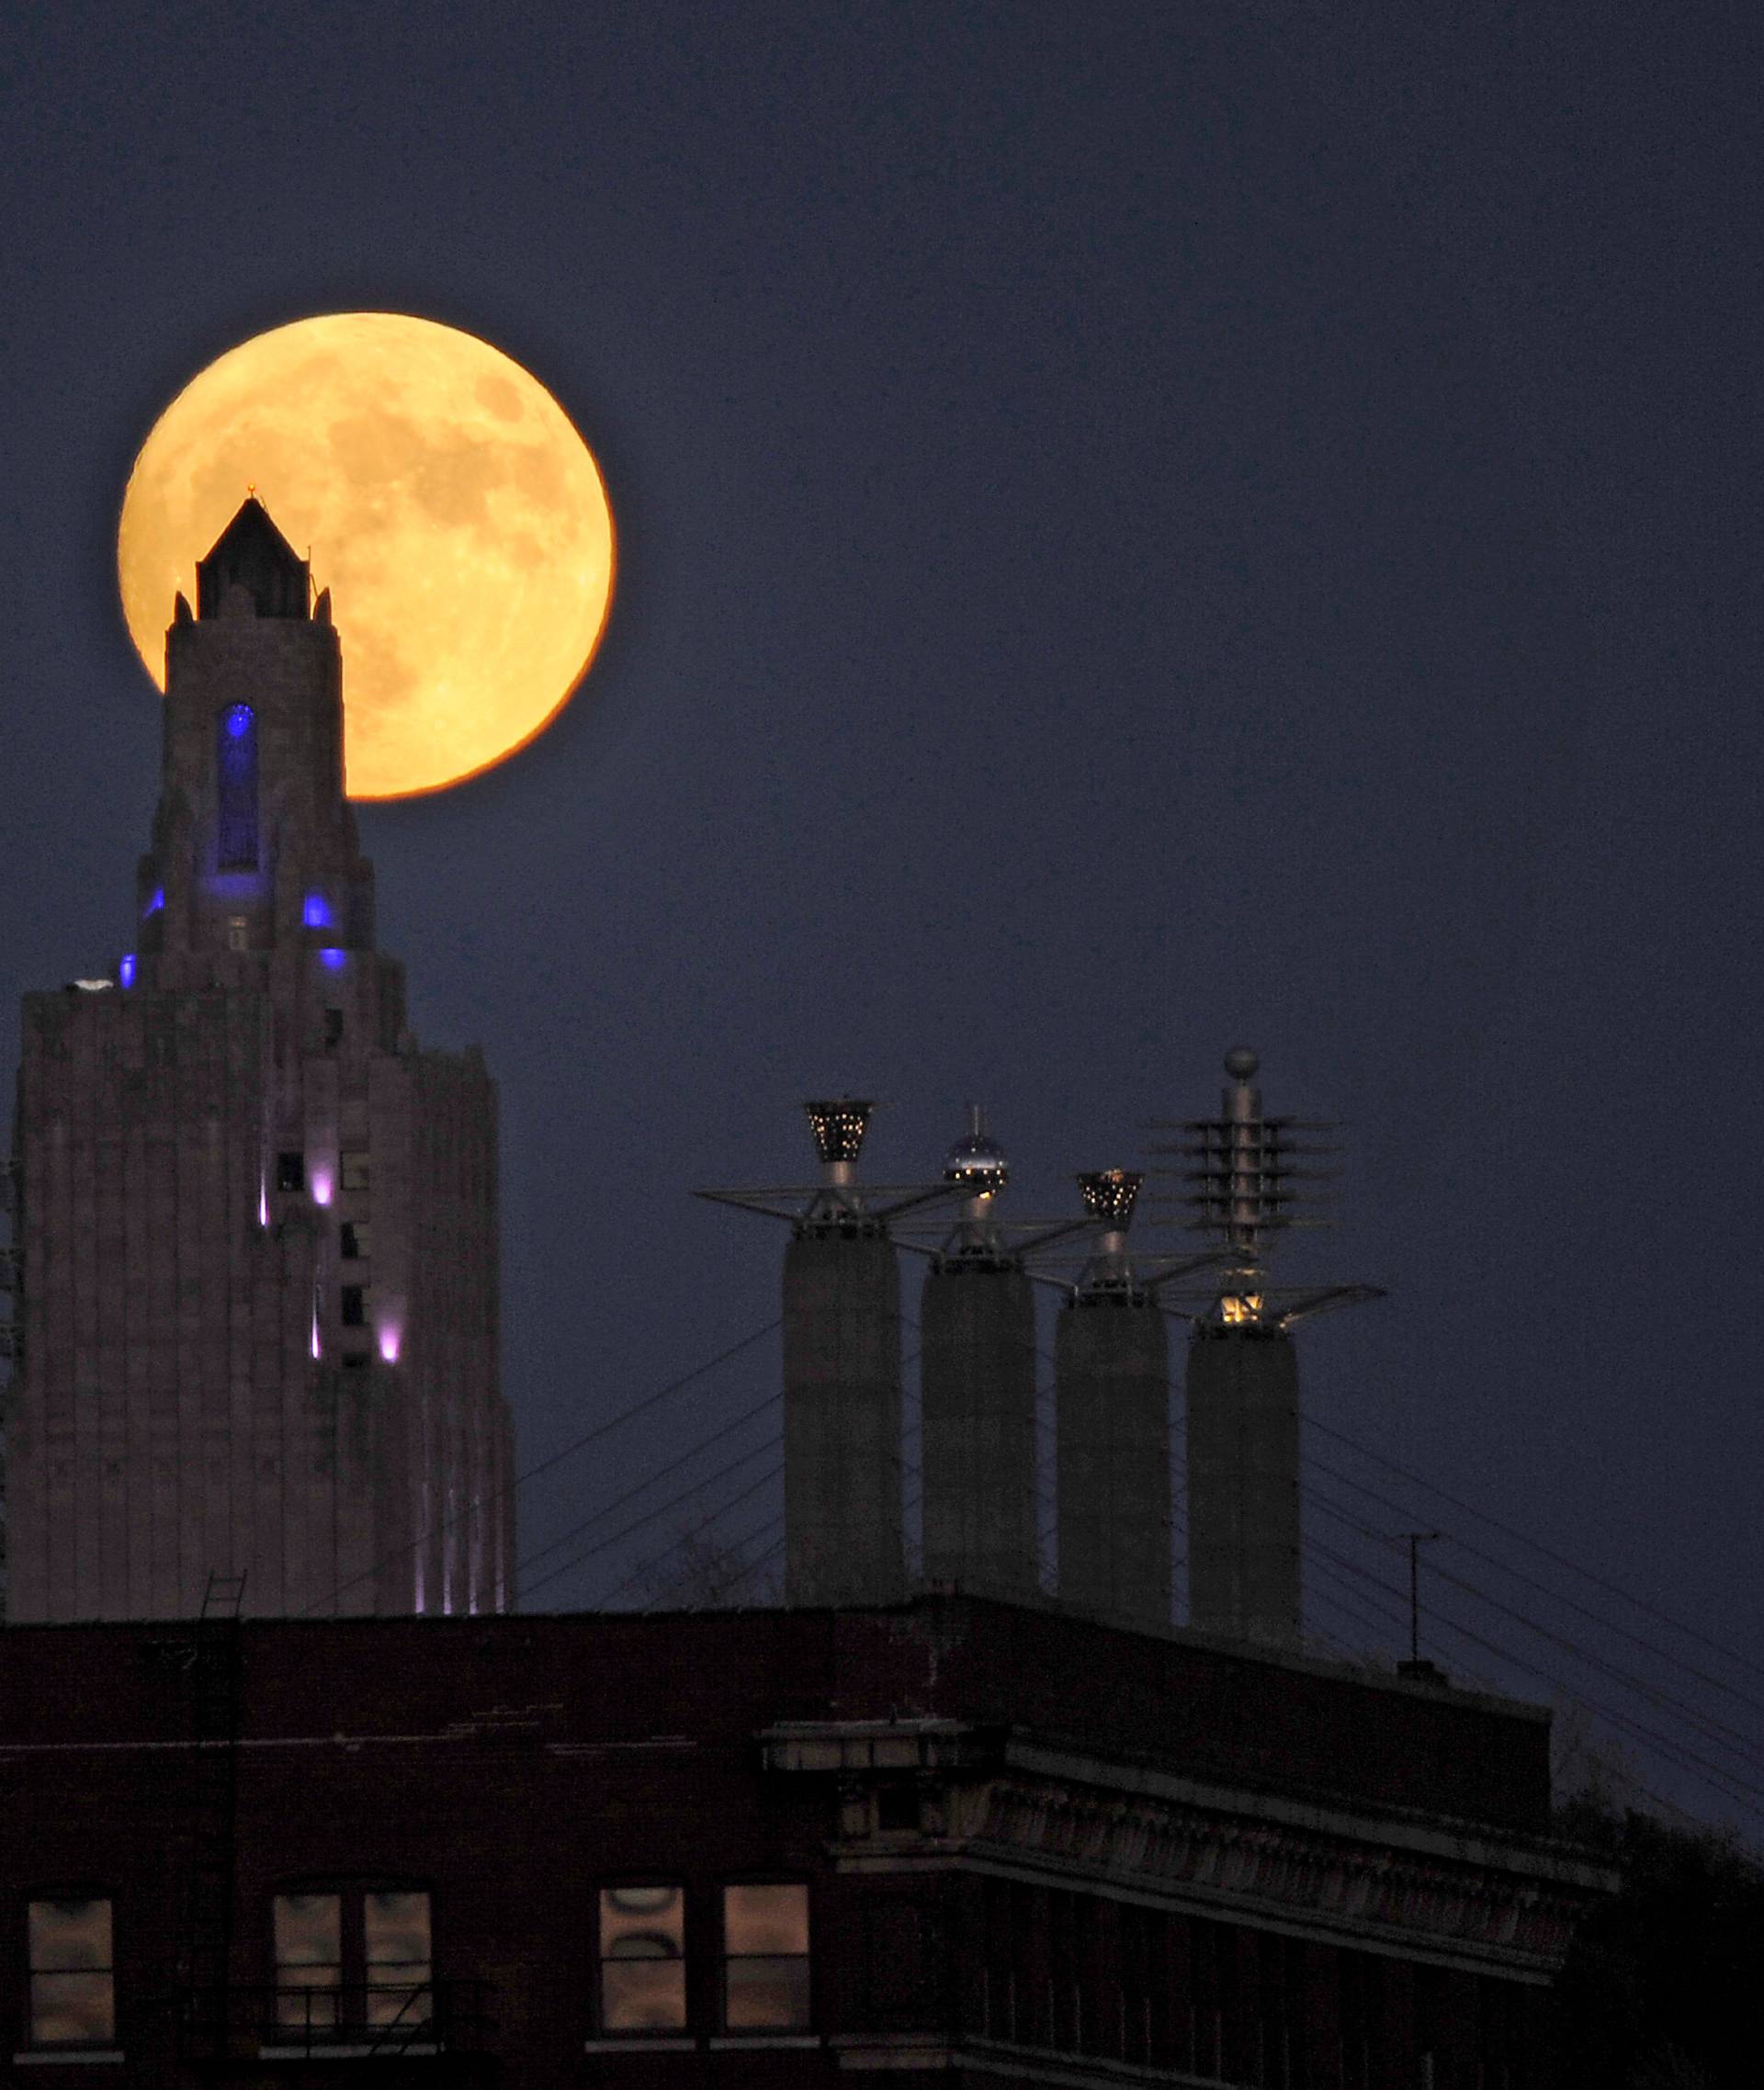 The "supermoon", the closest the moon comes to Earth since 1948, rises over the Power and Light building in downtown Kansas City, Missouri